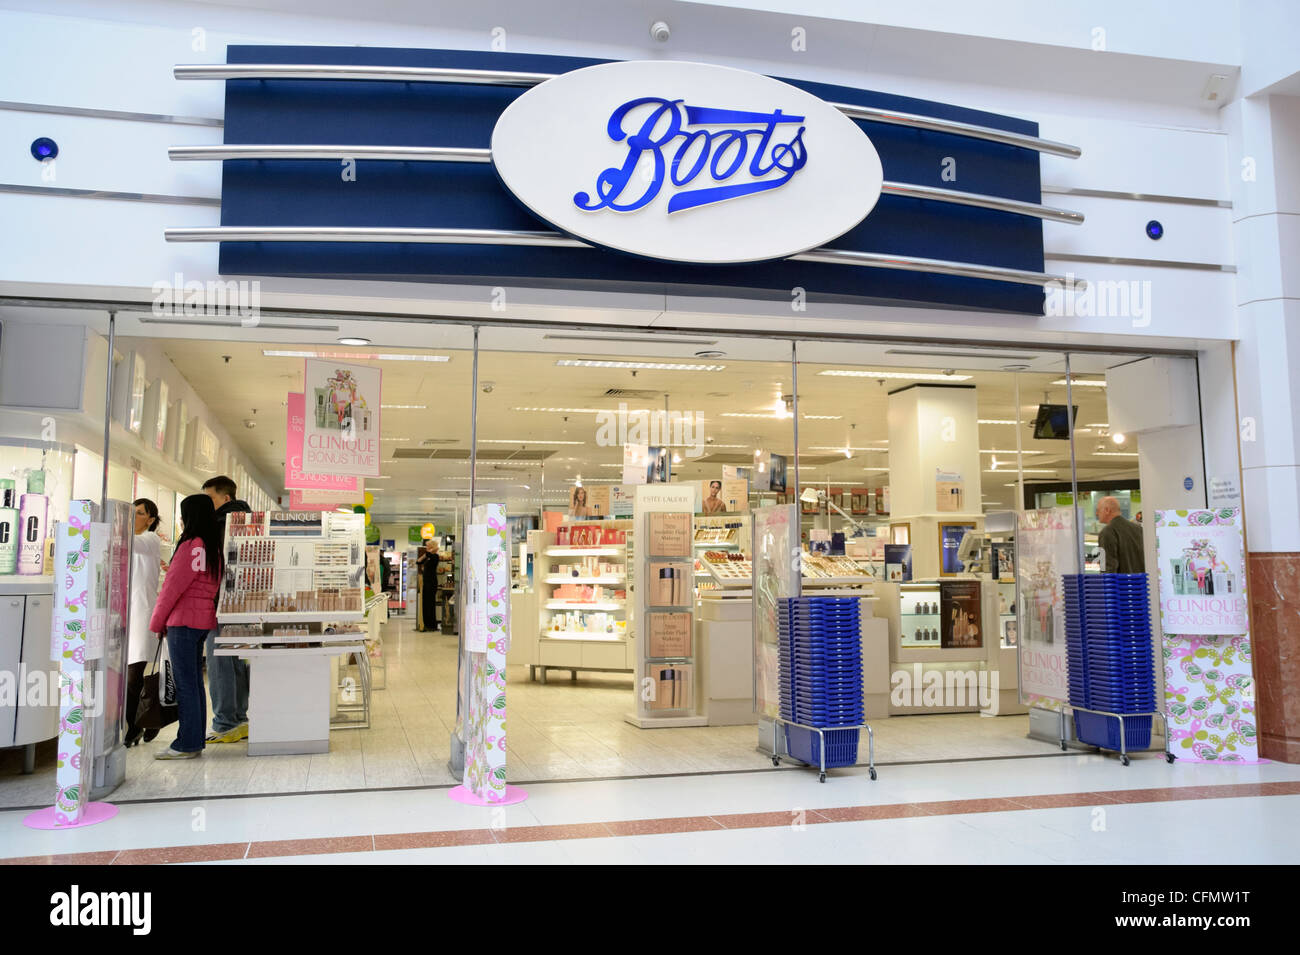 Boots chemist at Merry Hill shopping centre, West Midlands, UK. Stock Photo